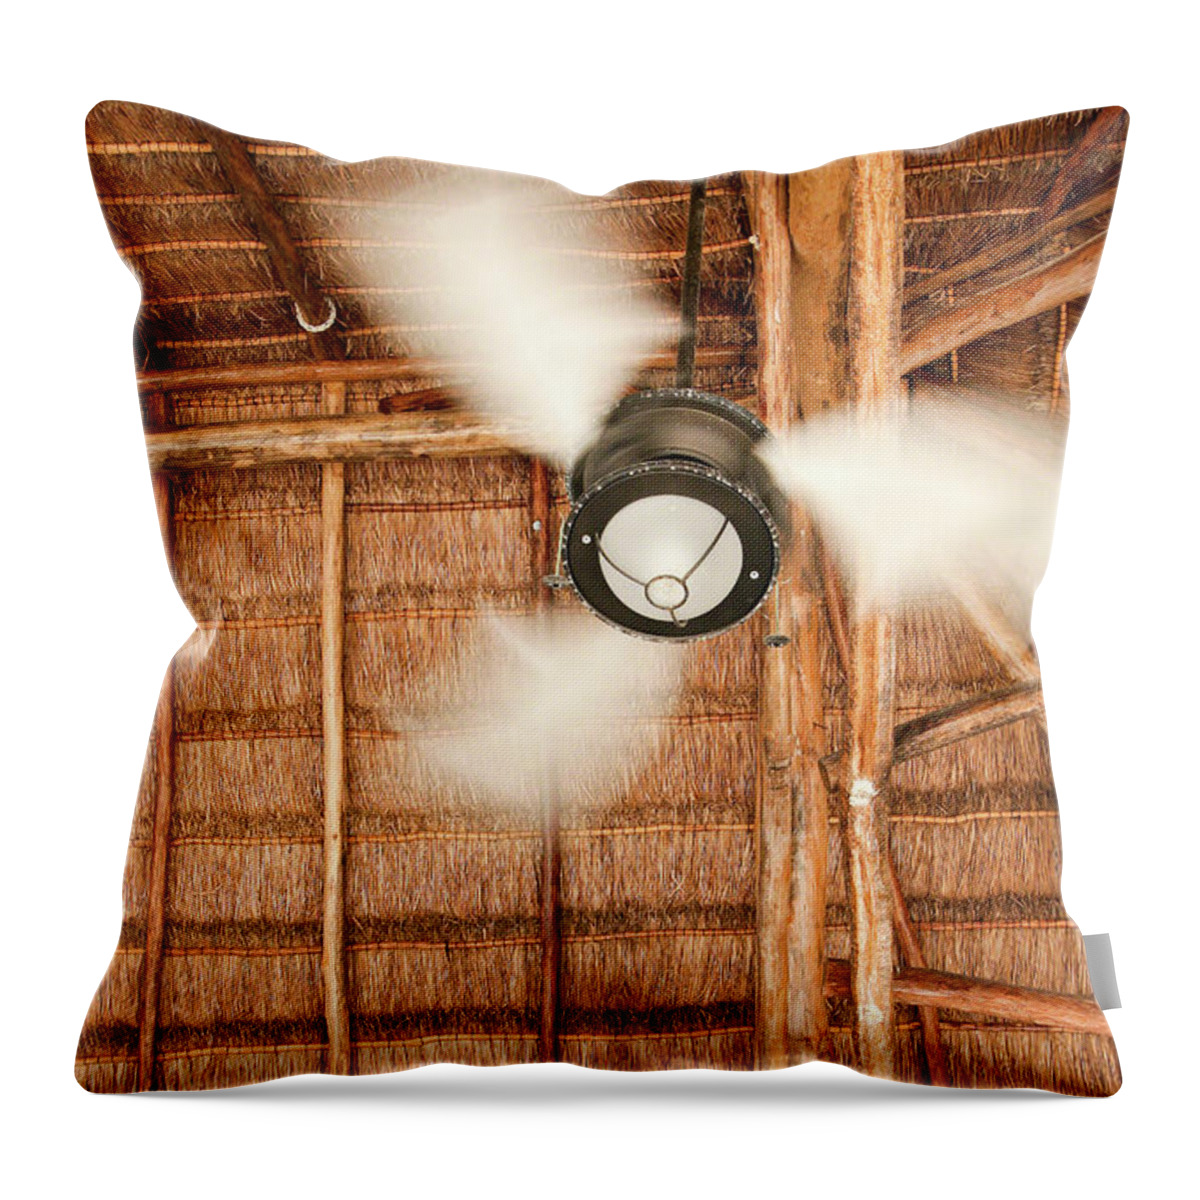 Tropical Throw Pillow featuring the photograph Tropical Fan by Riccardo Forte